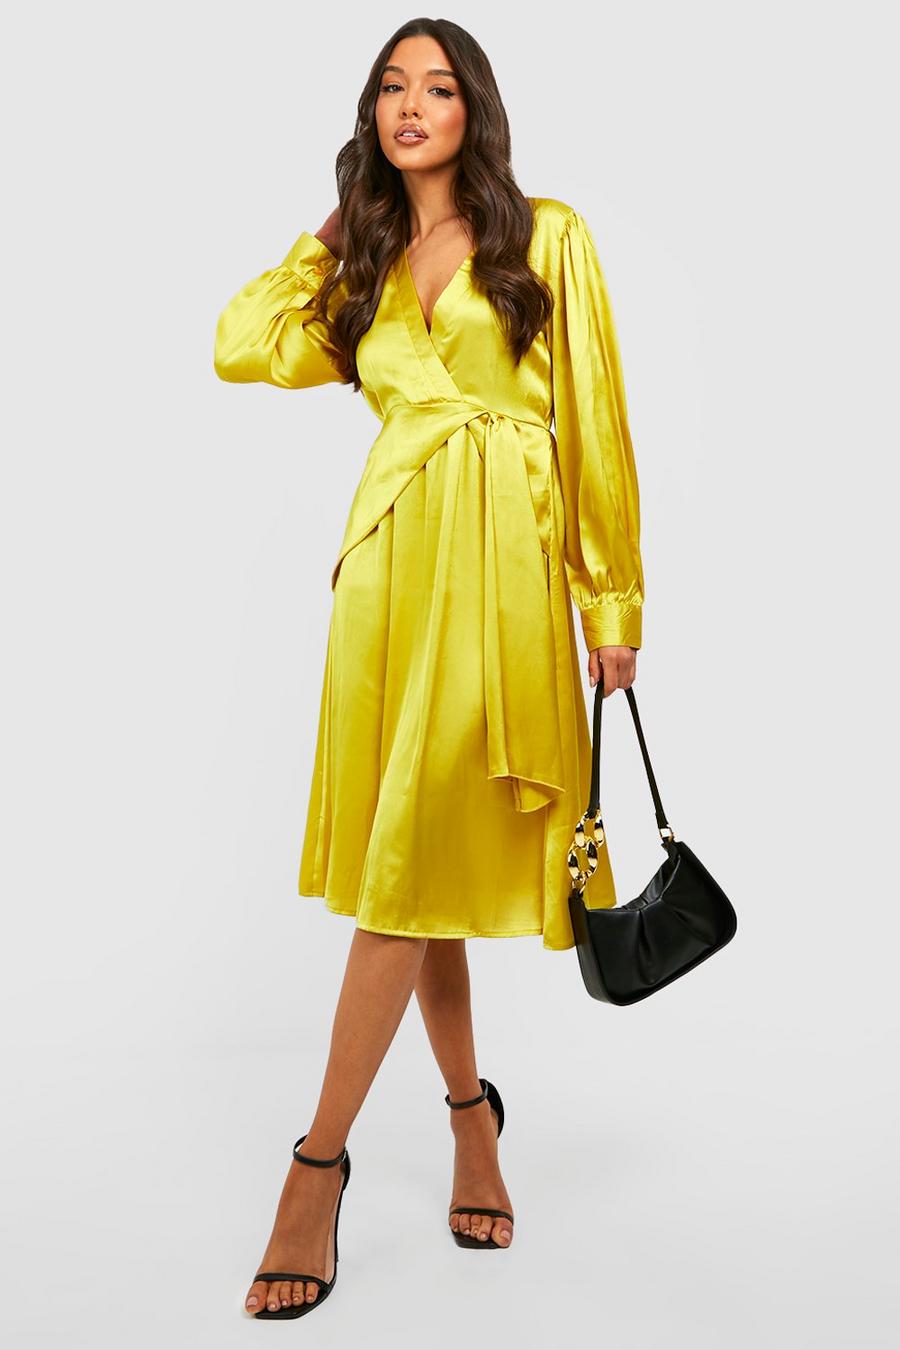 Chartreuse yellow The Midi Skater Dress